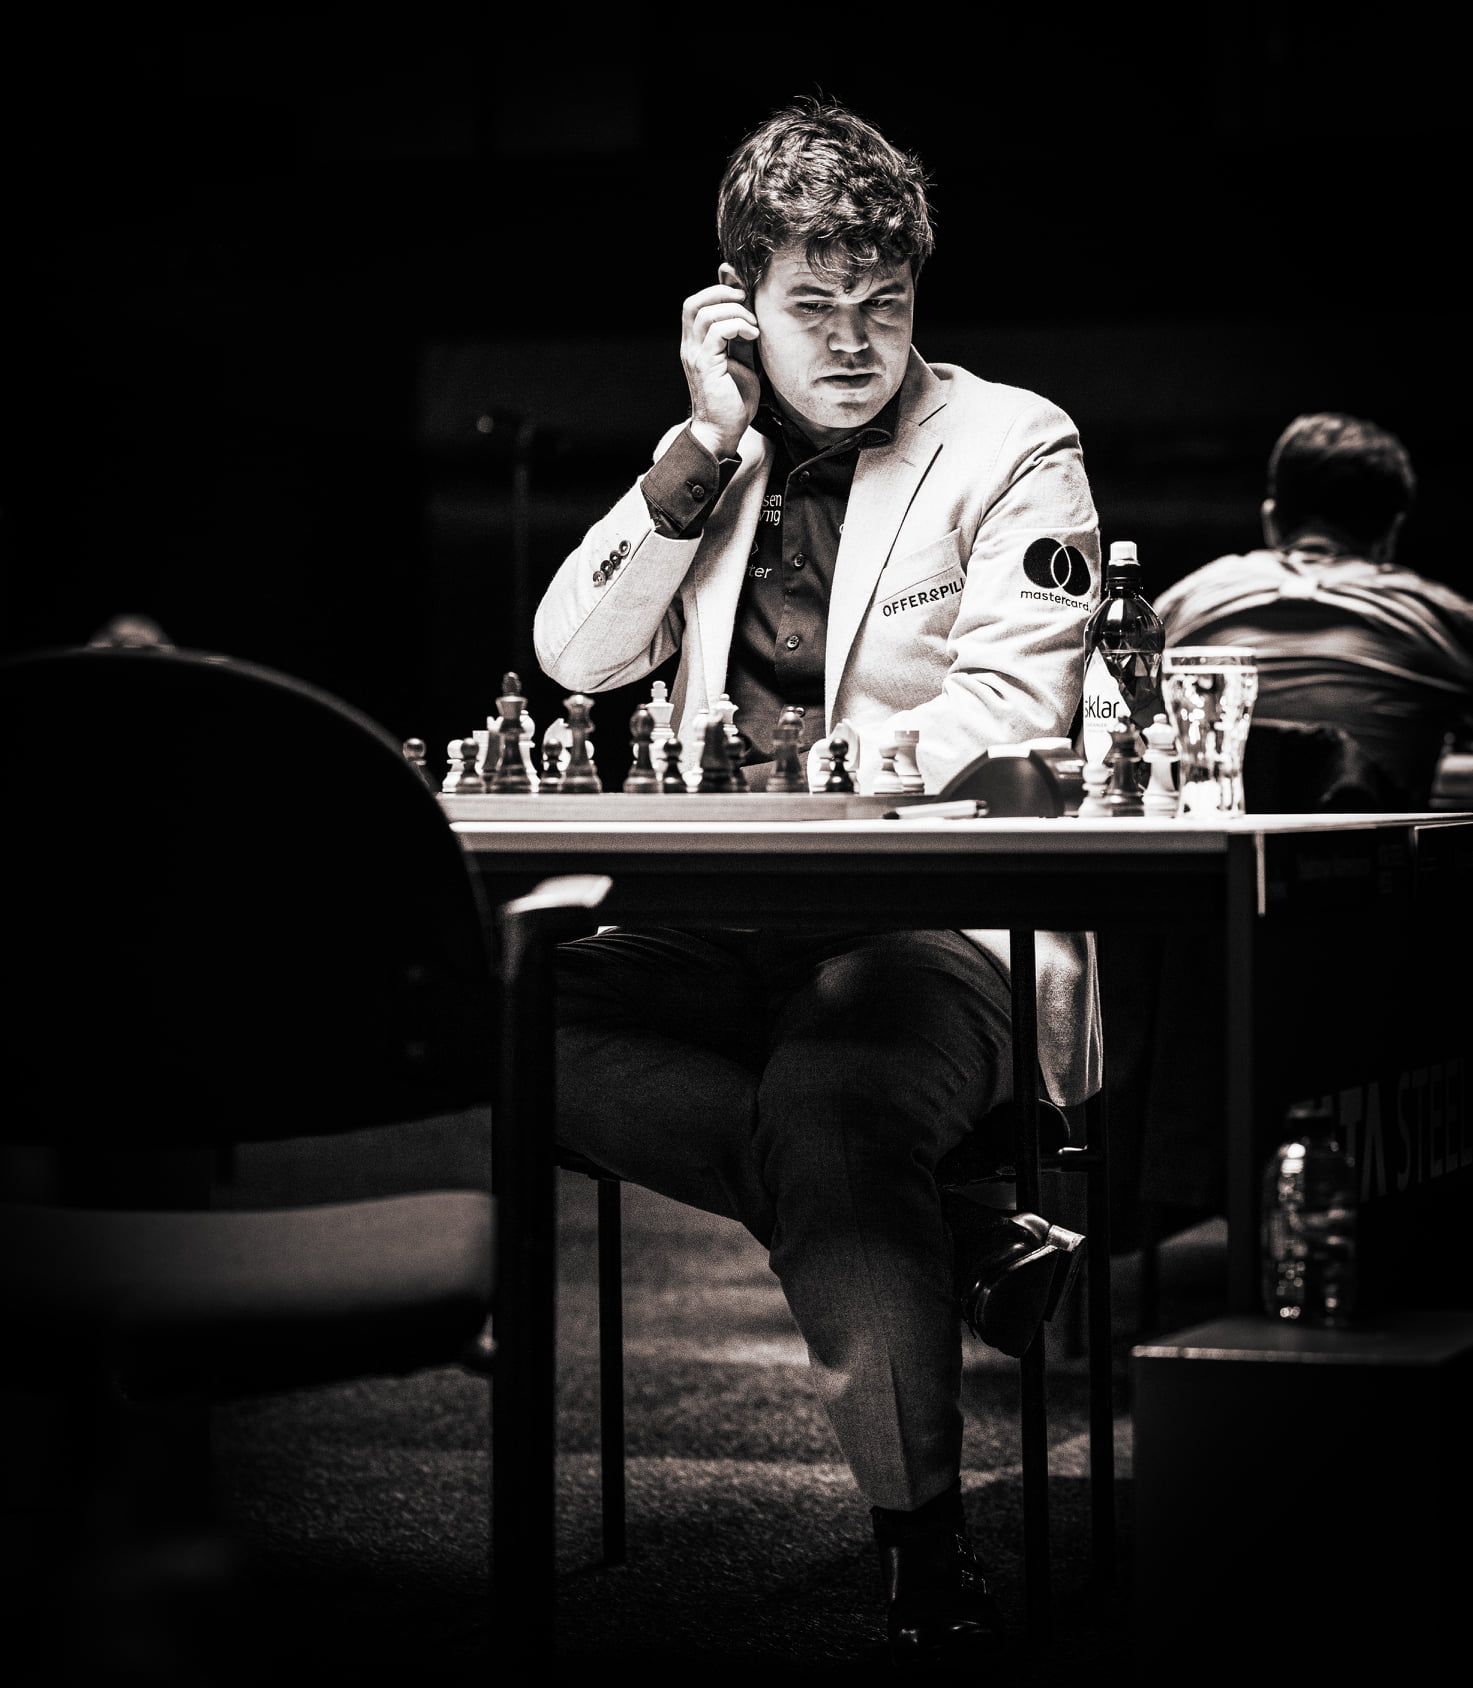 2700chess on X: So (2822.1) wins the #TataSteelChess with 9/13